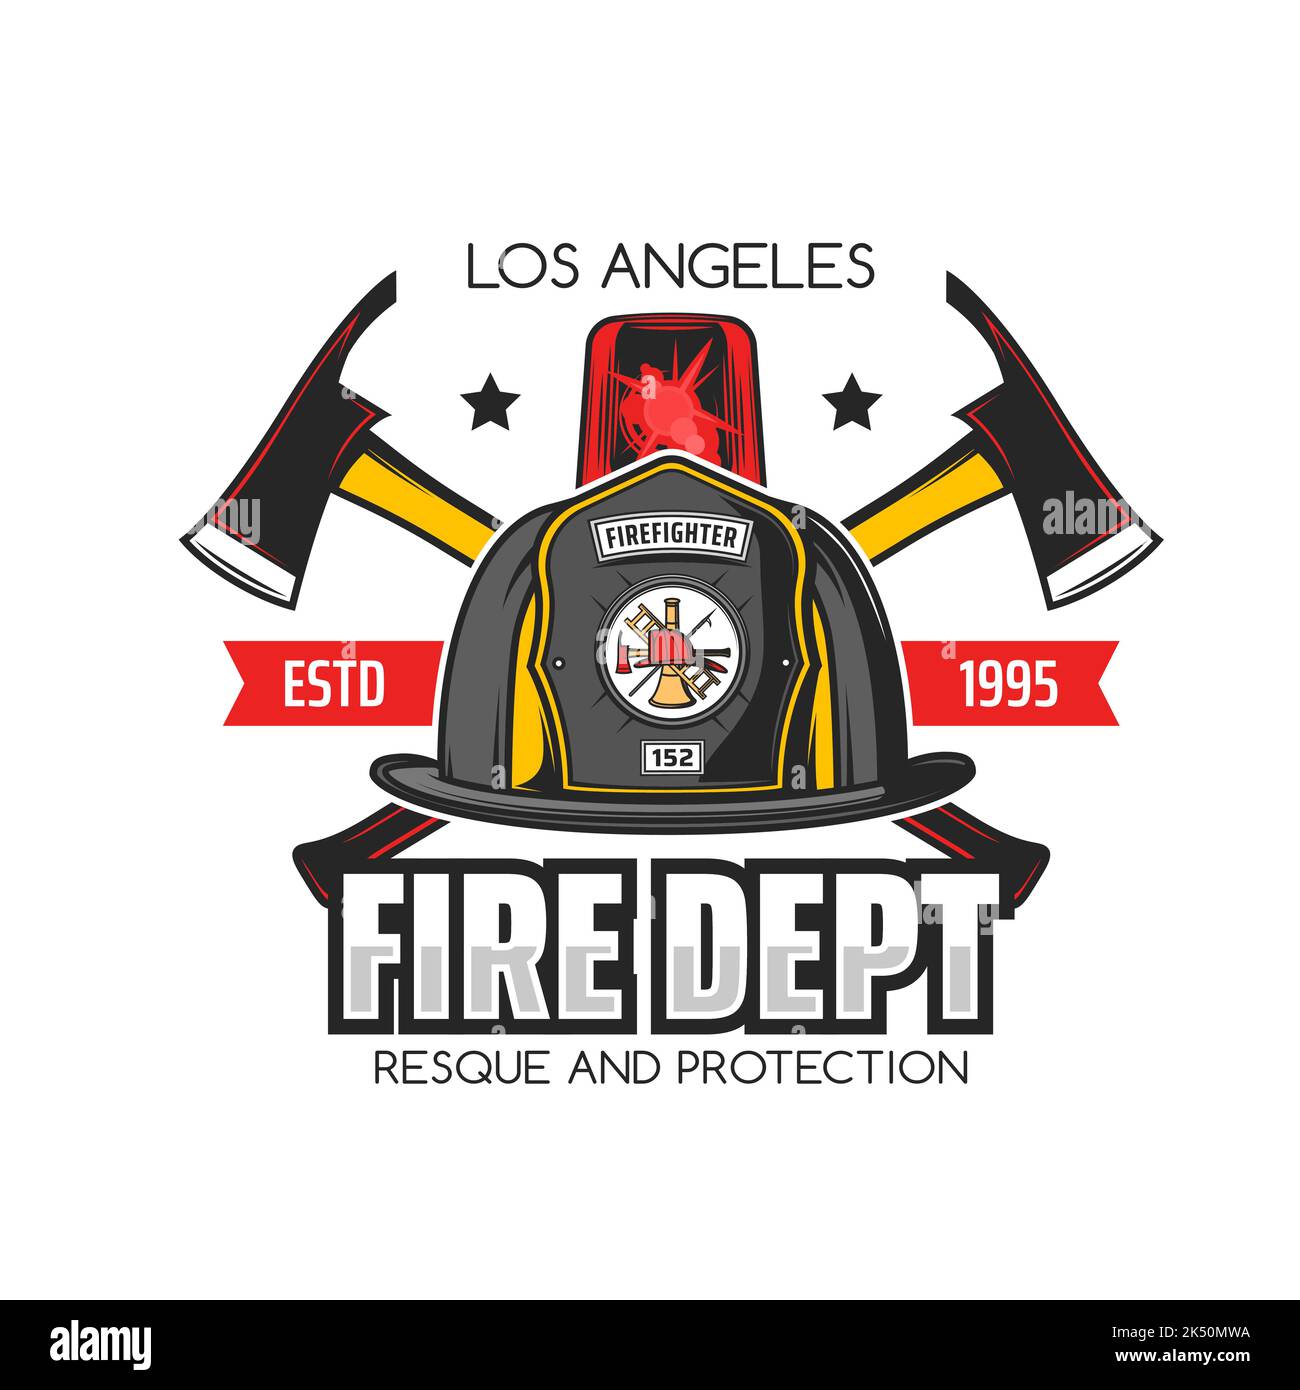 Firefighting icon and fire department symbol with vector helmet of firefighter or fireman, crossed axes and fire truck emergency red light. Rescue service isolated badge with firefighter equipment Stock Vector